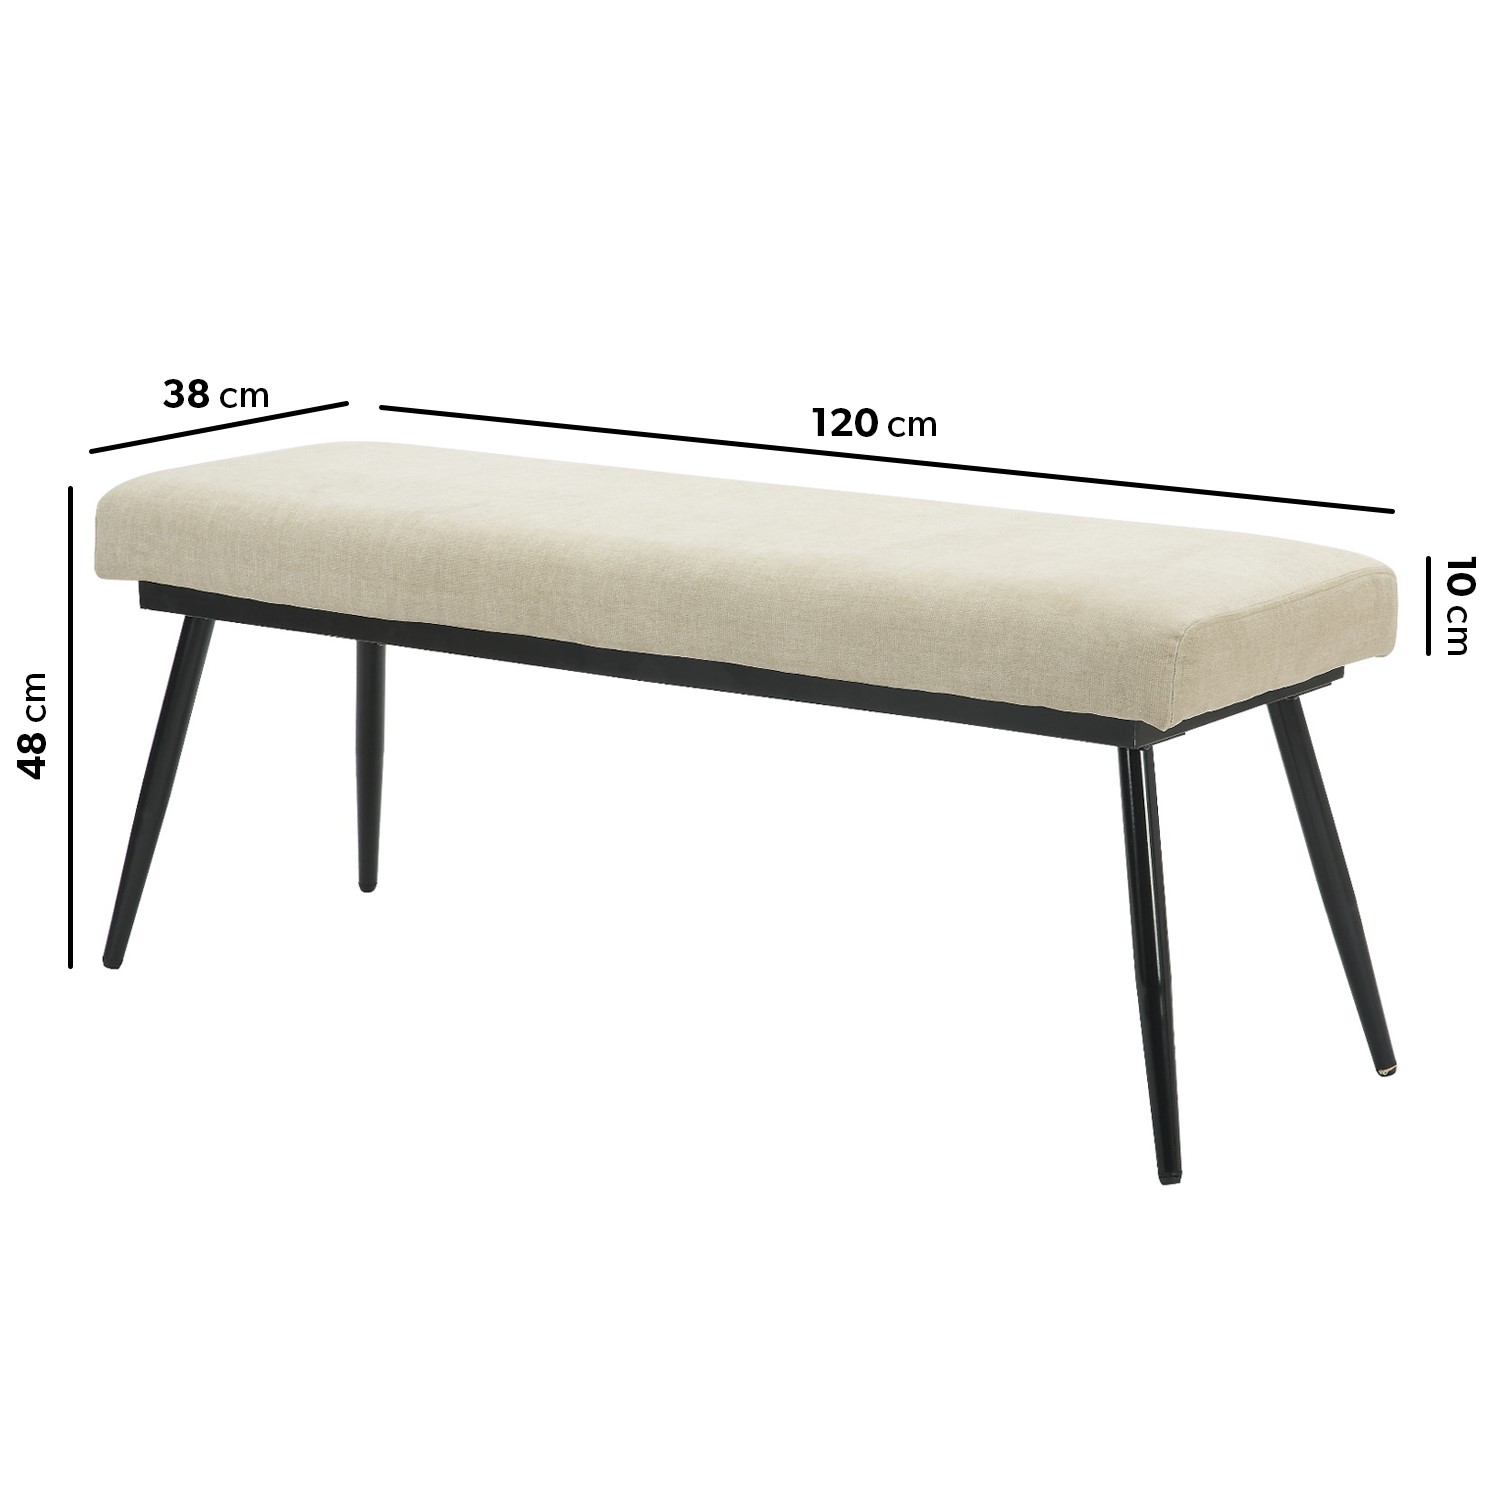 Read more about Large beige chenile dining bench seats 2 colbie